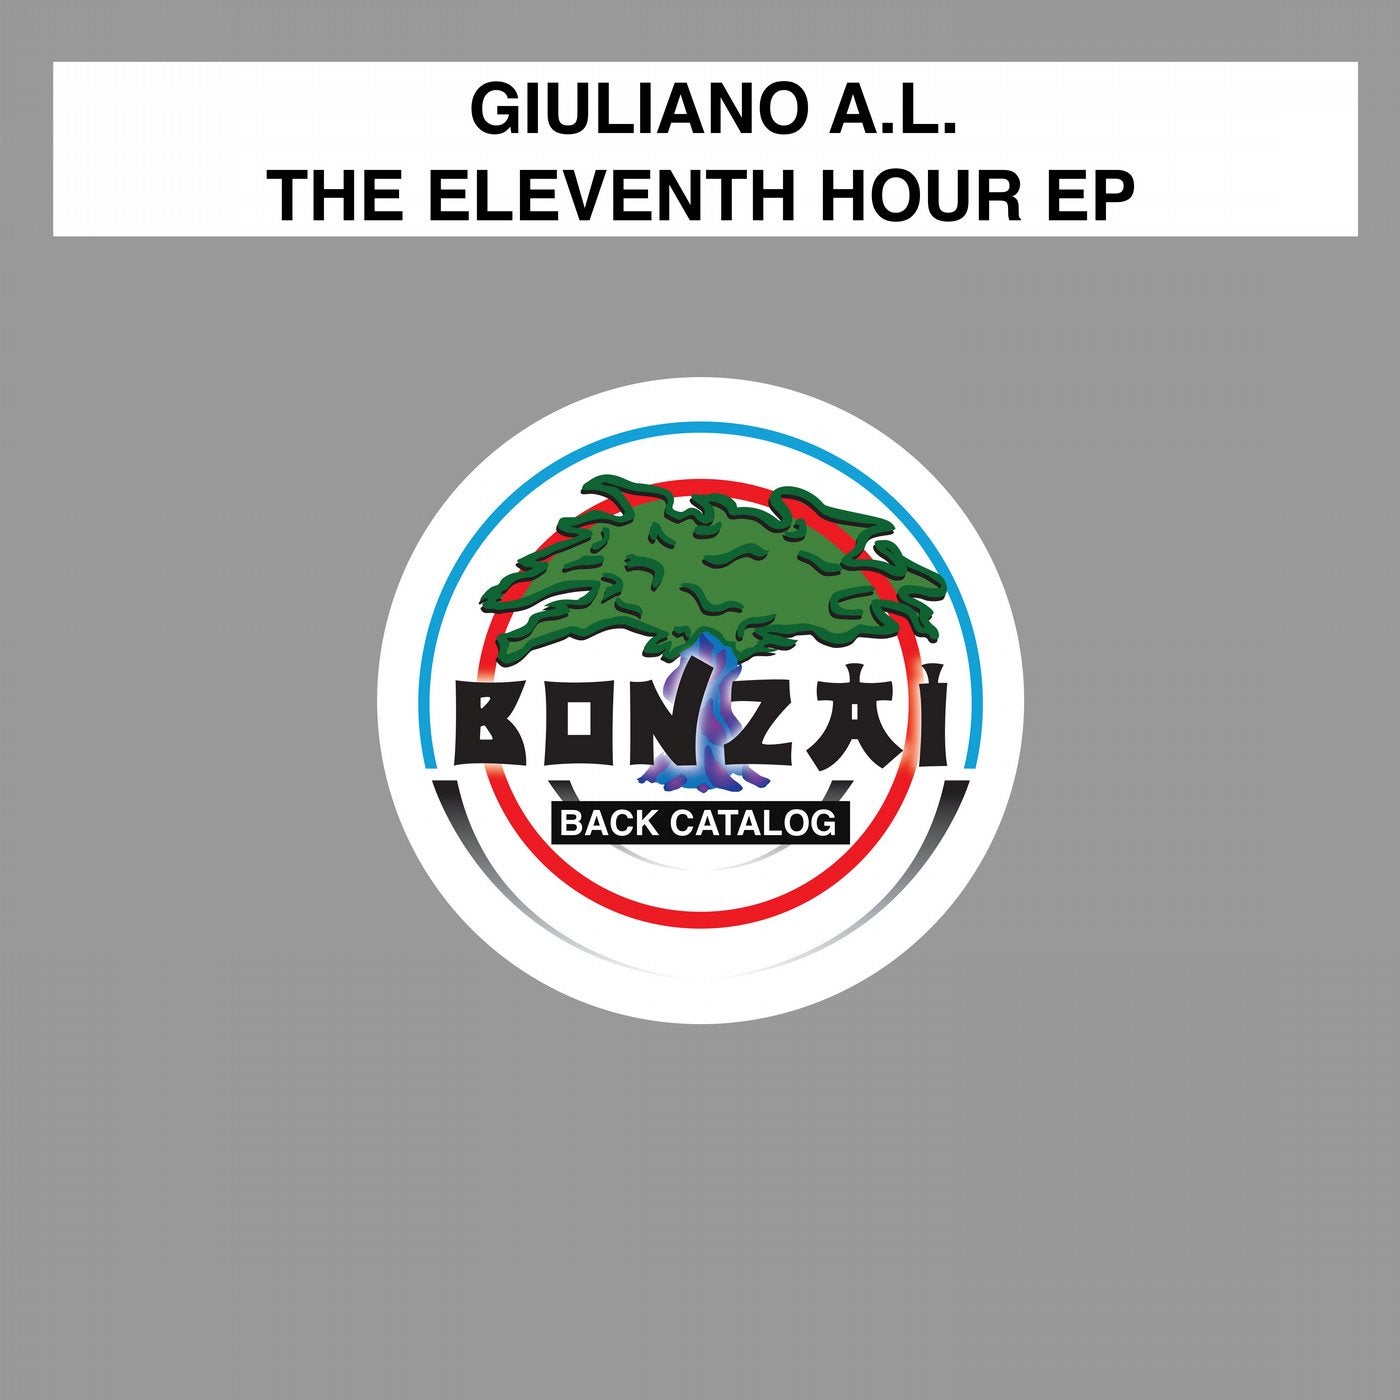 The Eleventh Hour EP